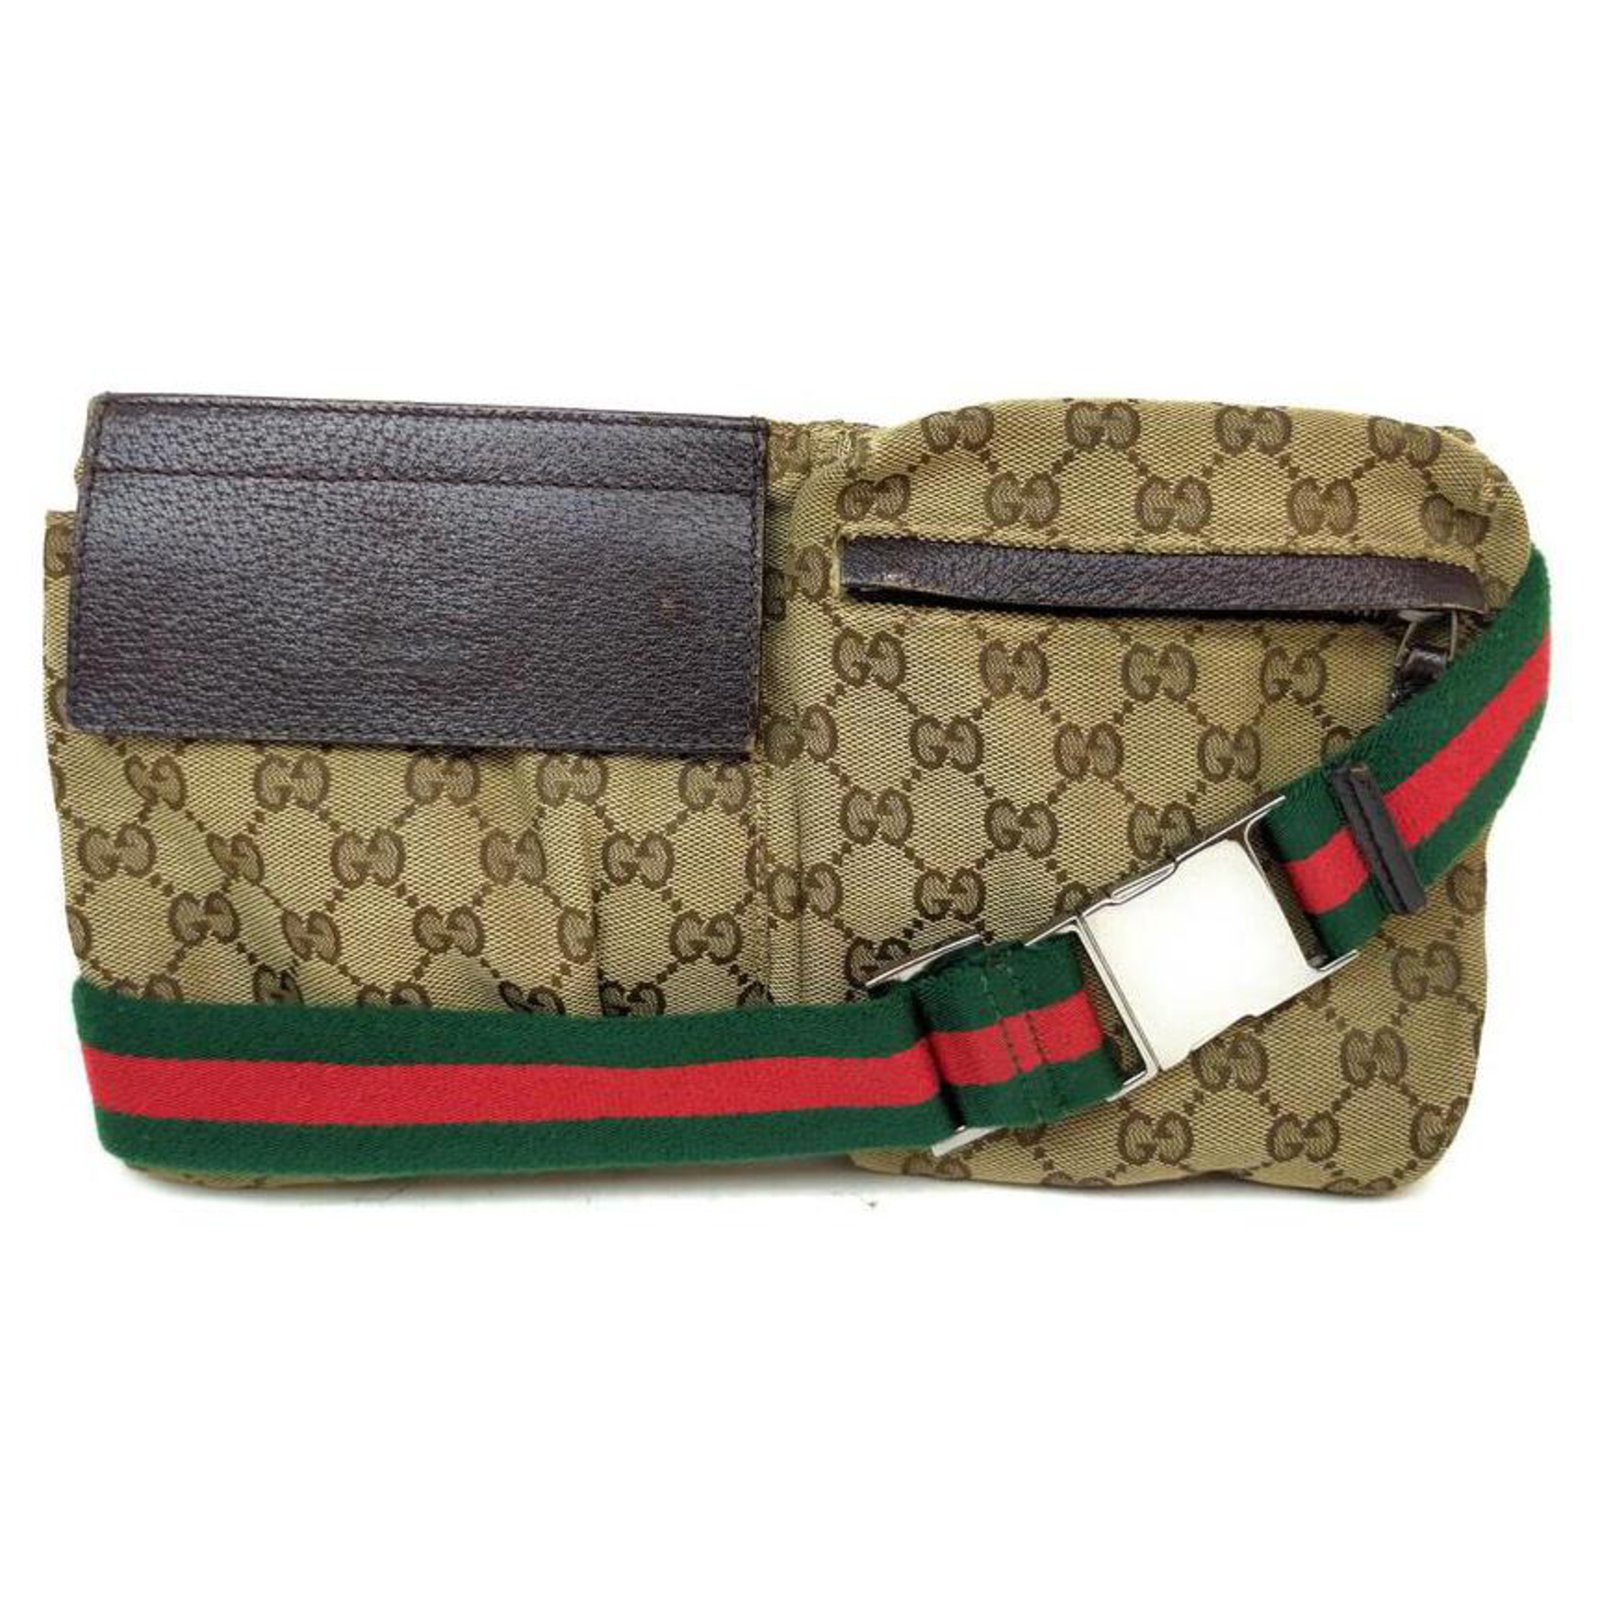 Search results for: 'louis vuitton west bag